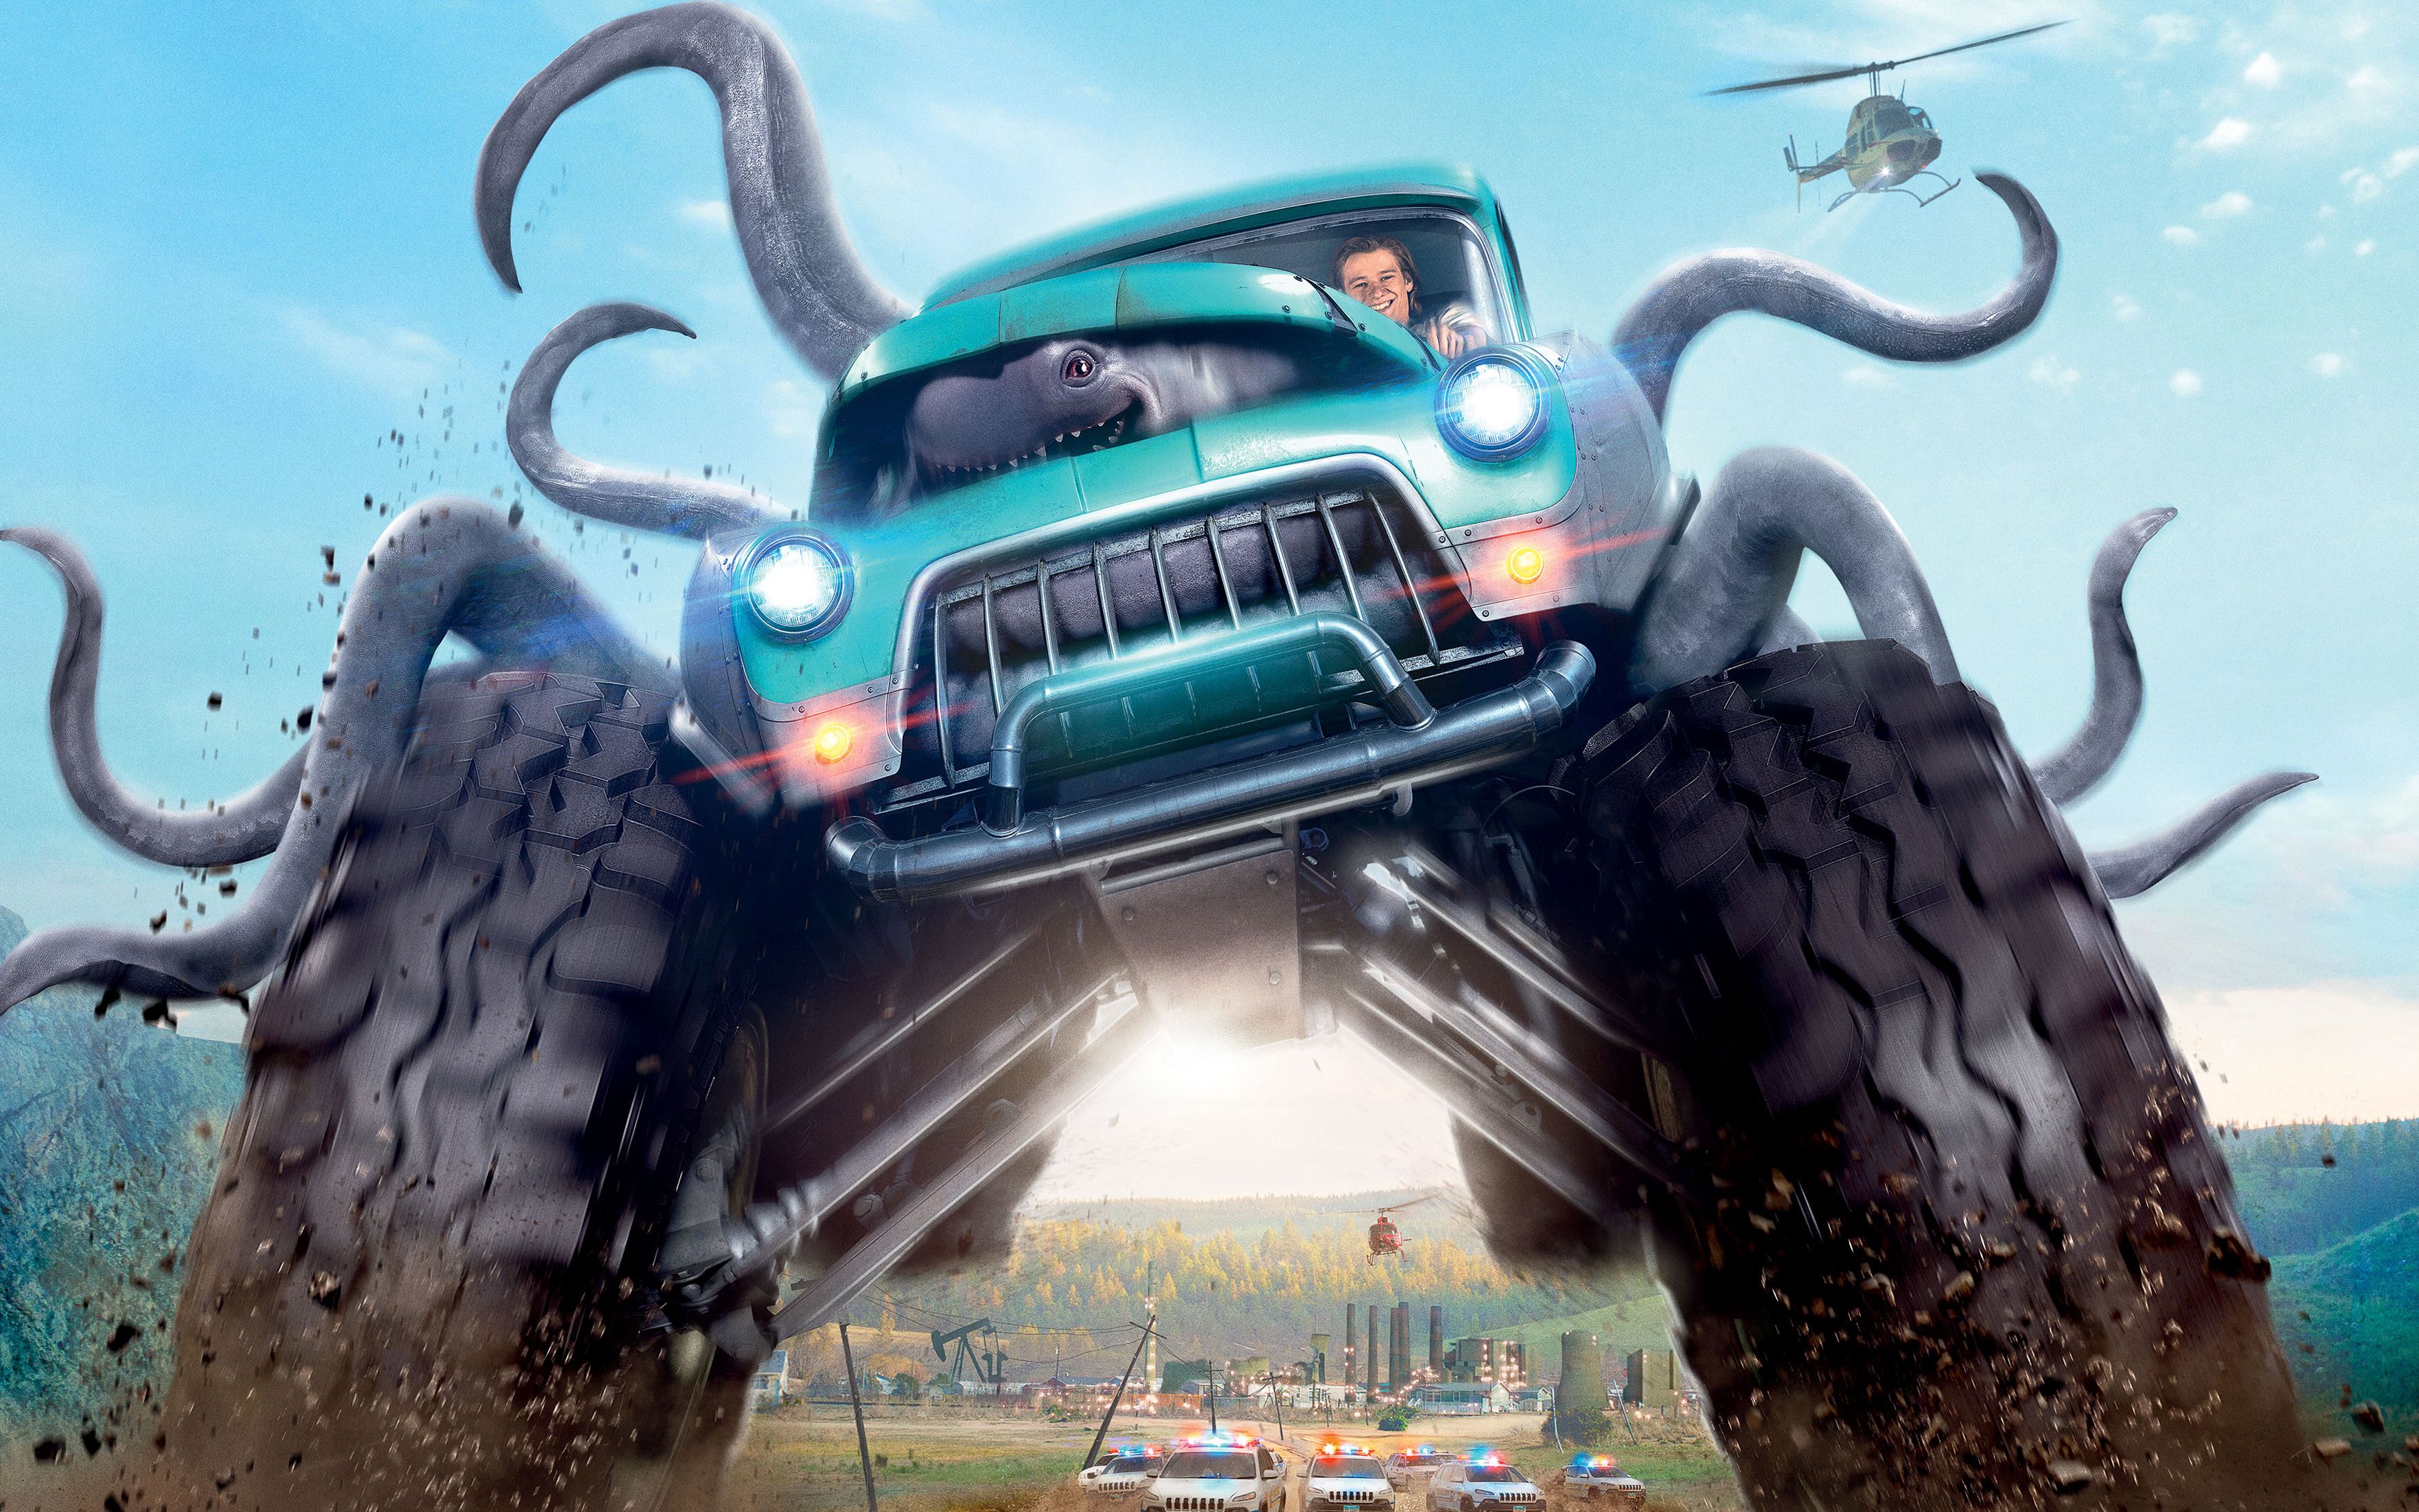 Monster Truck Wallpaper and Background Image